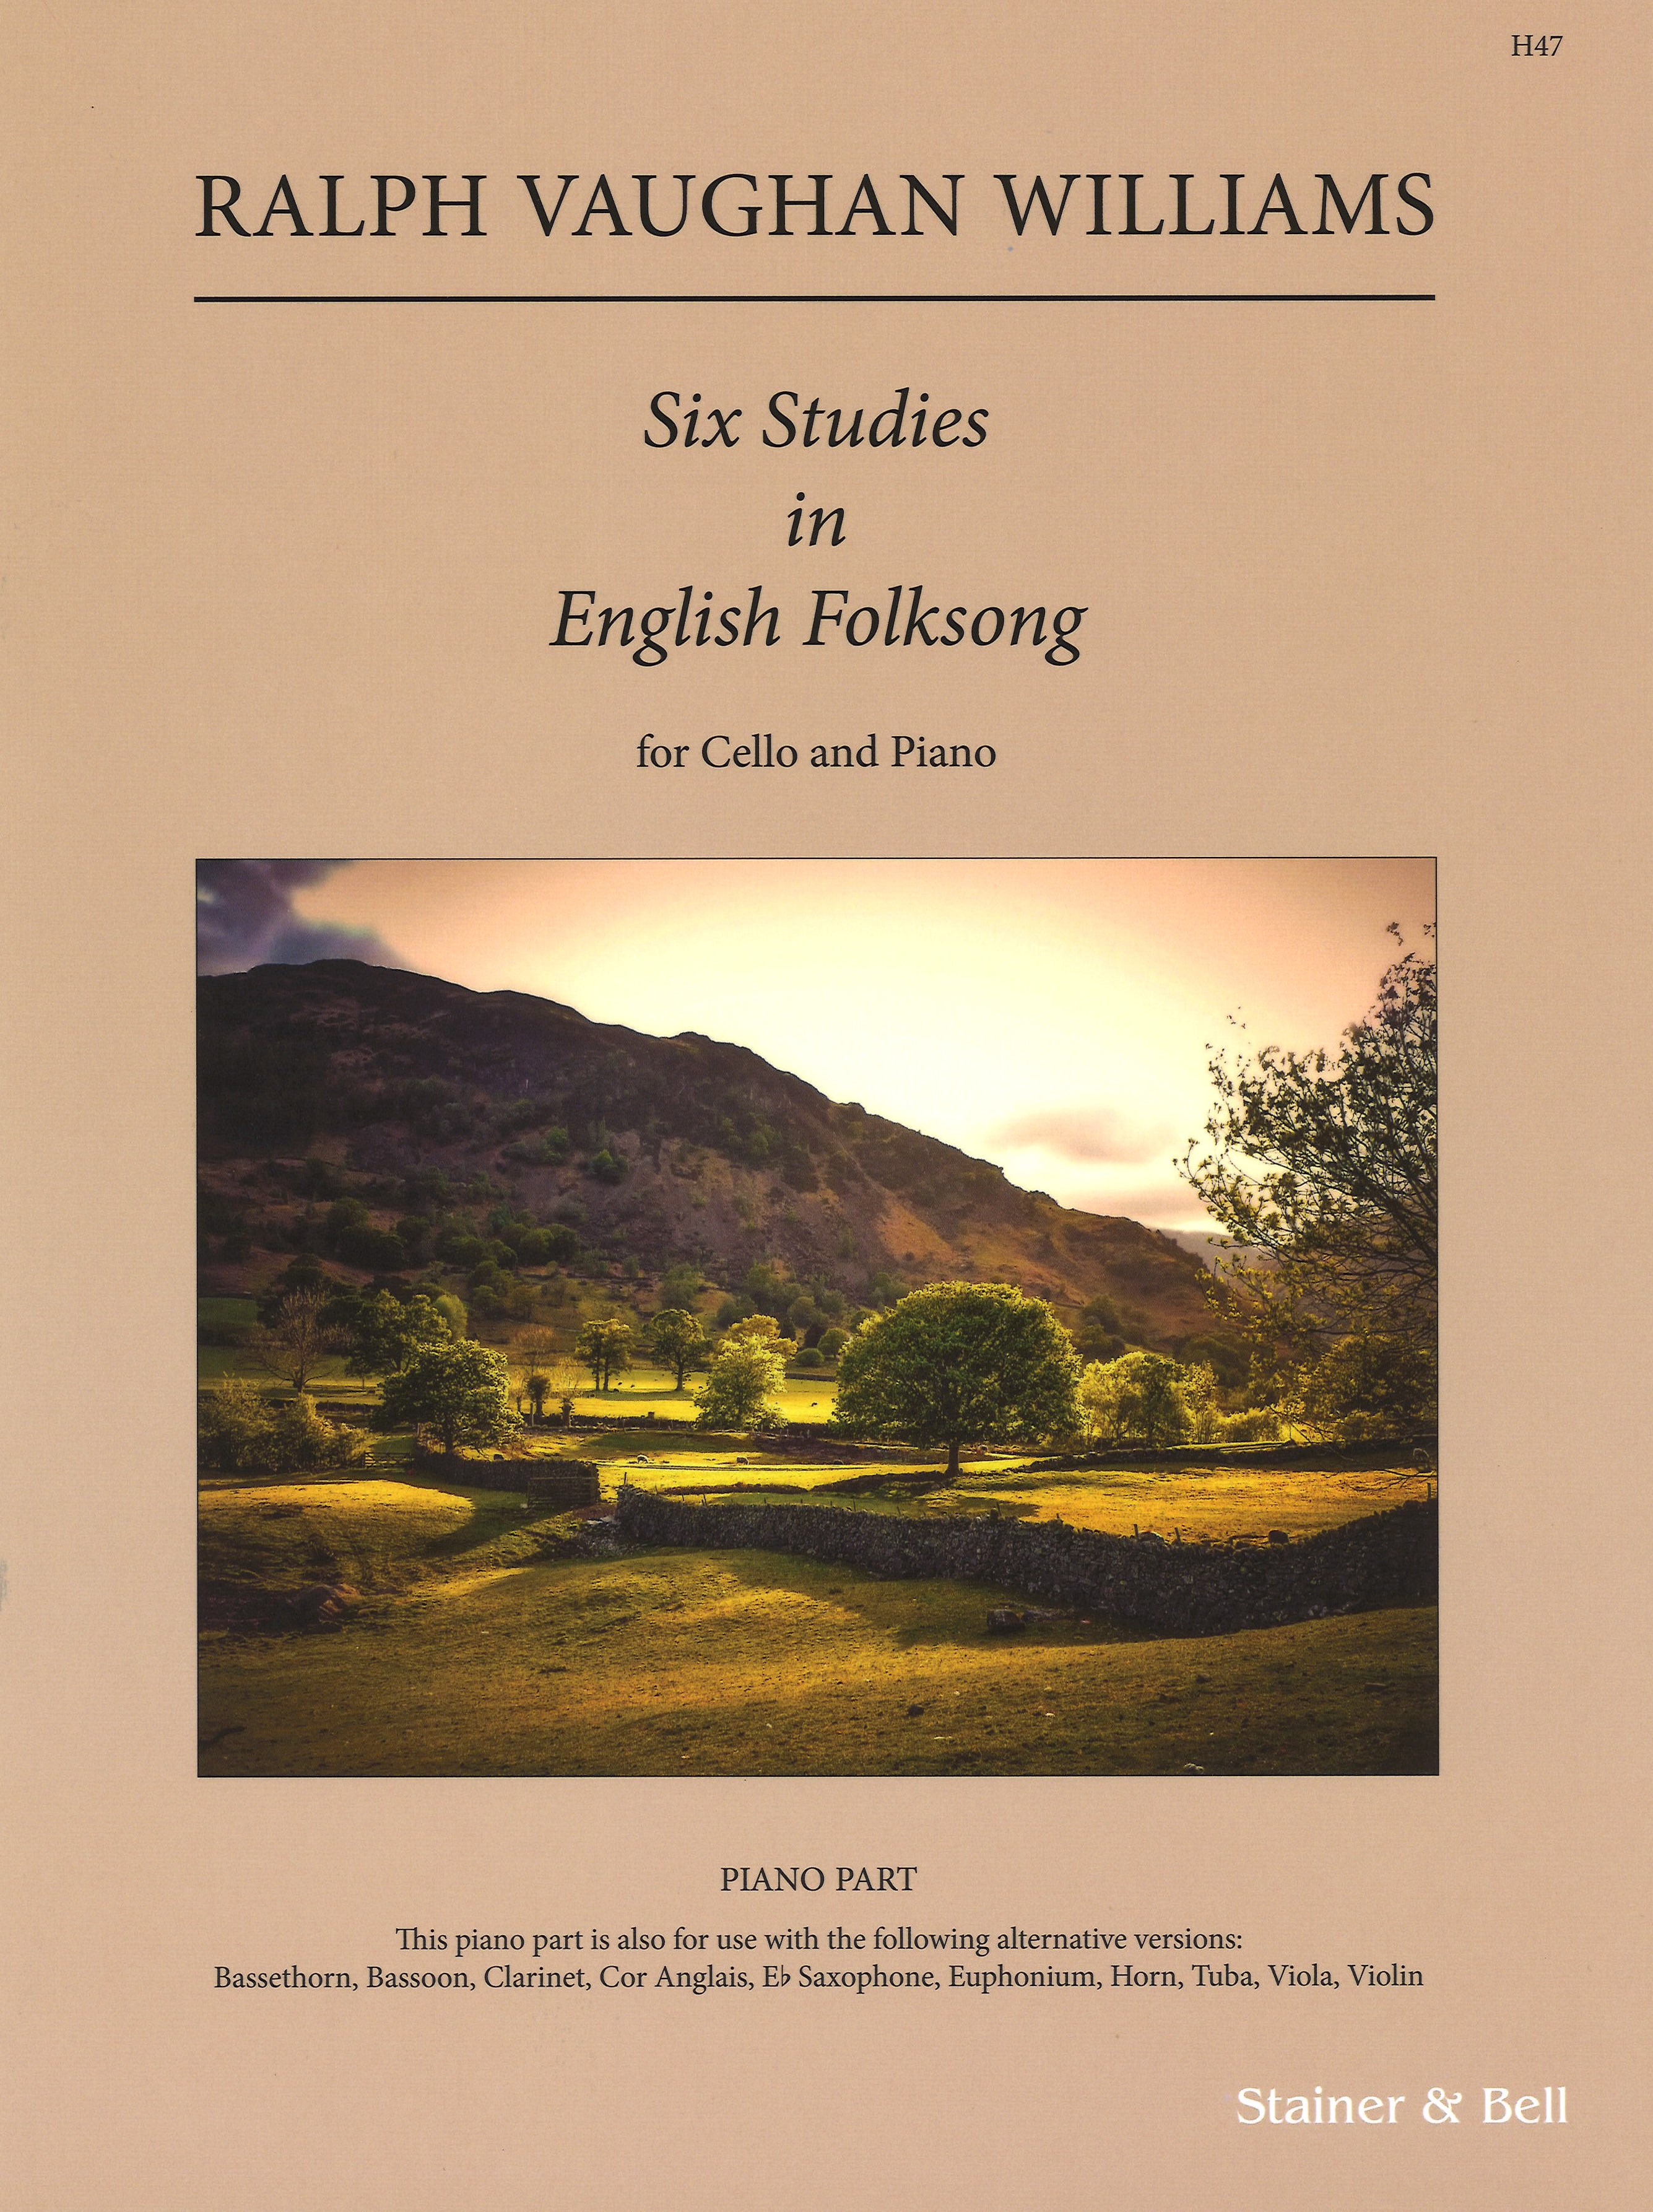 Vaughan Williams 6 Studies Eng Folksong Piano Part Sheet Music Songbook